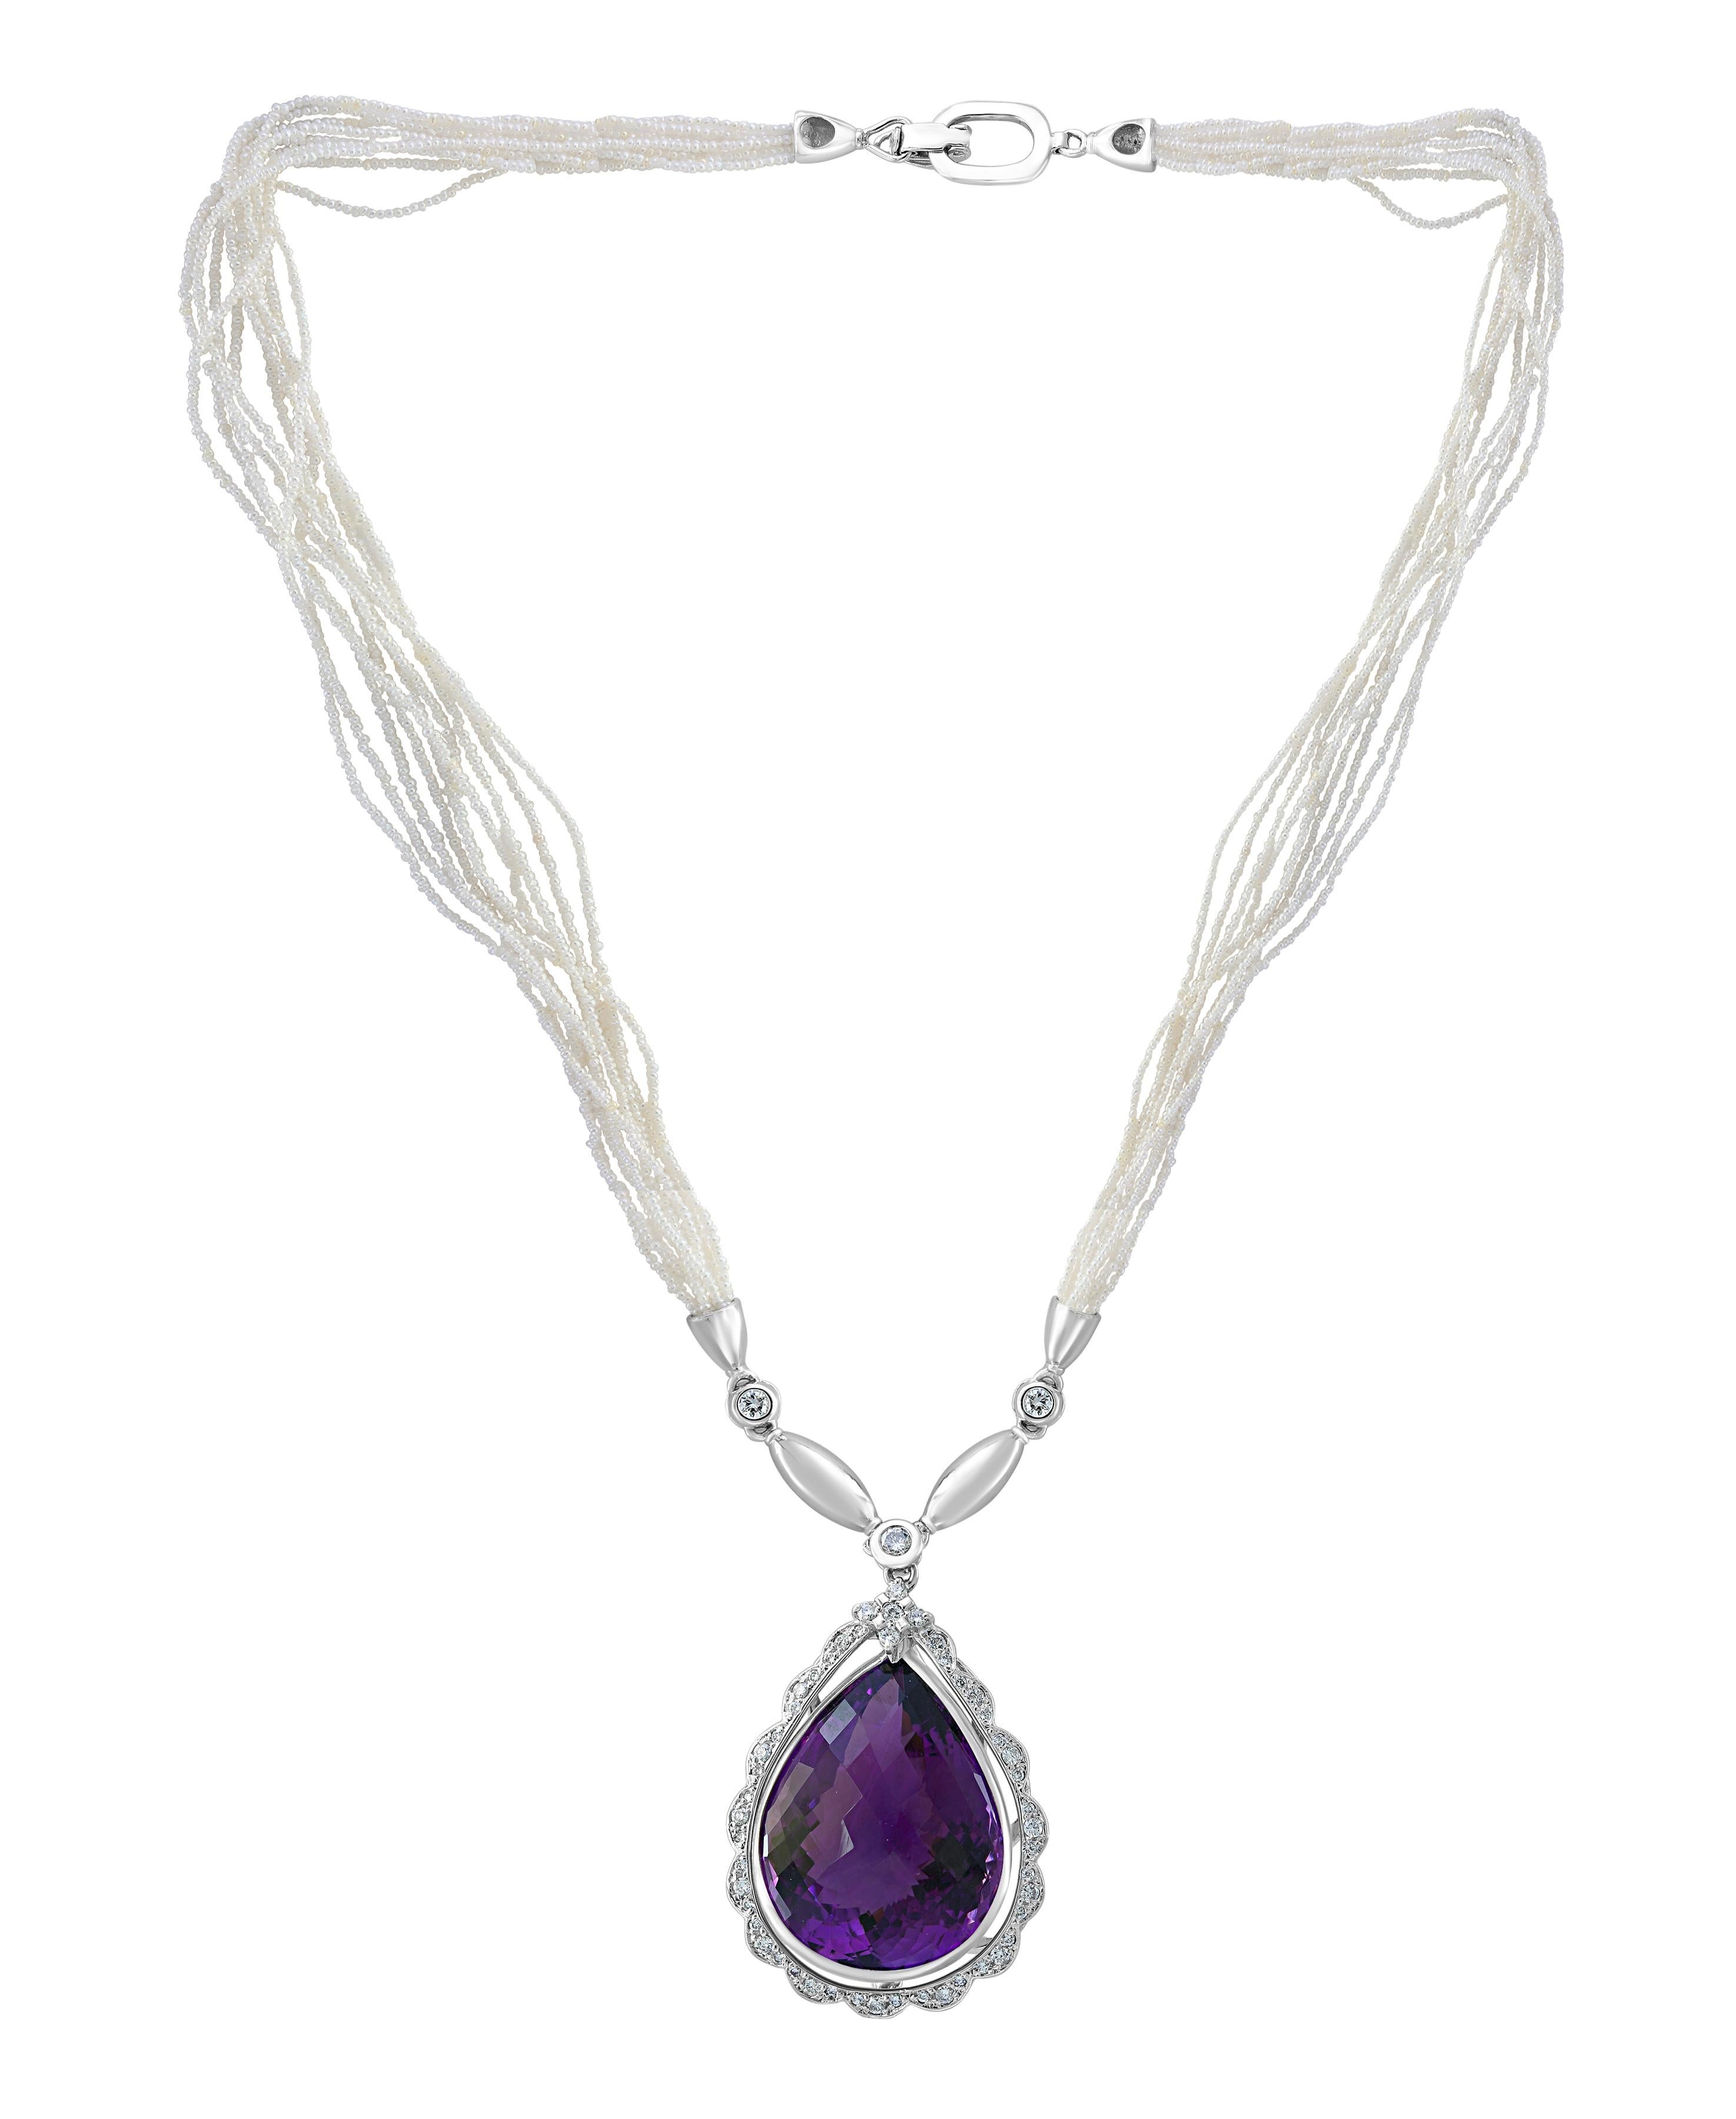 Pear Cut 54 Carat Tear Drop Amethyst and Diamonds with Seed Pearl Necklace 18 Karat Gold For Sale